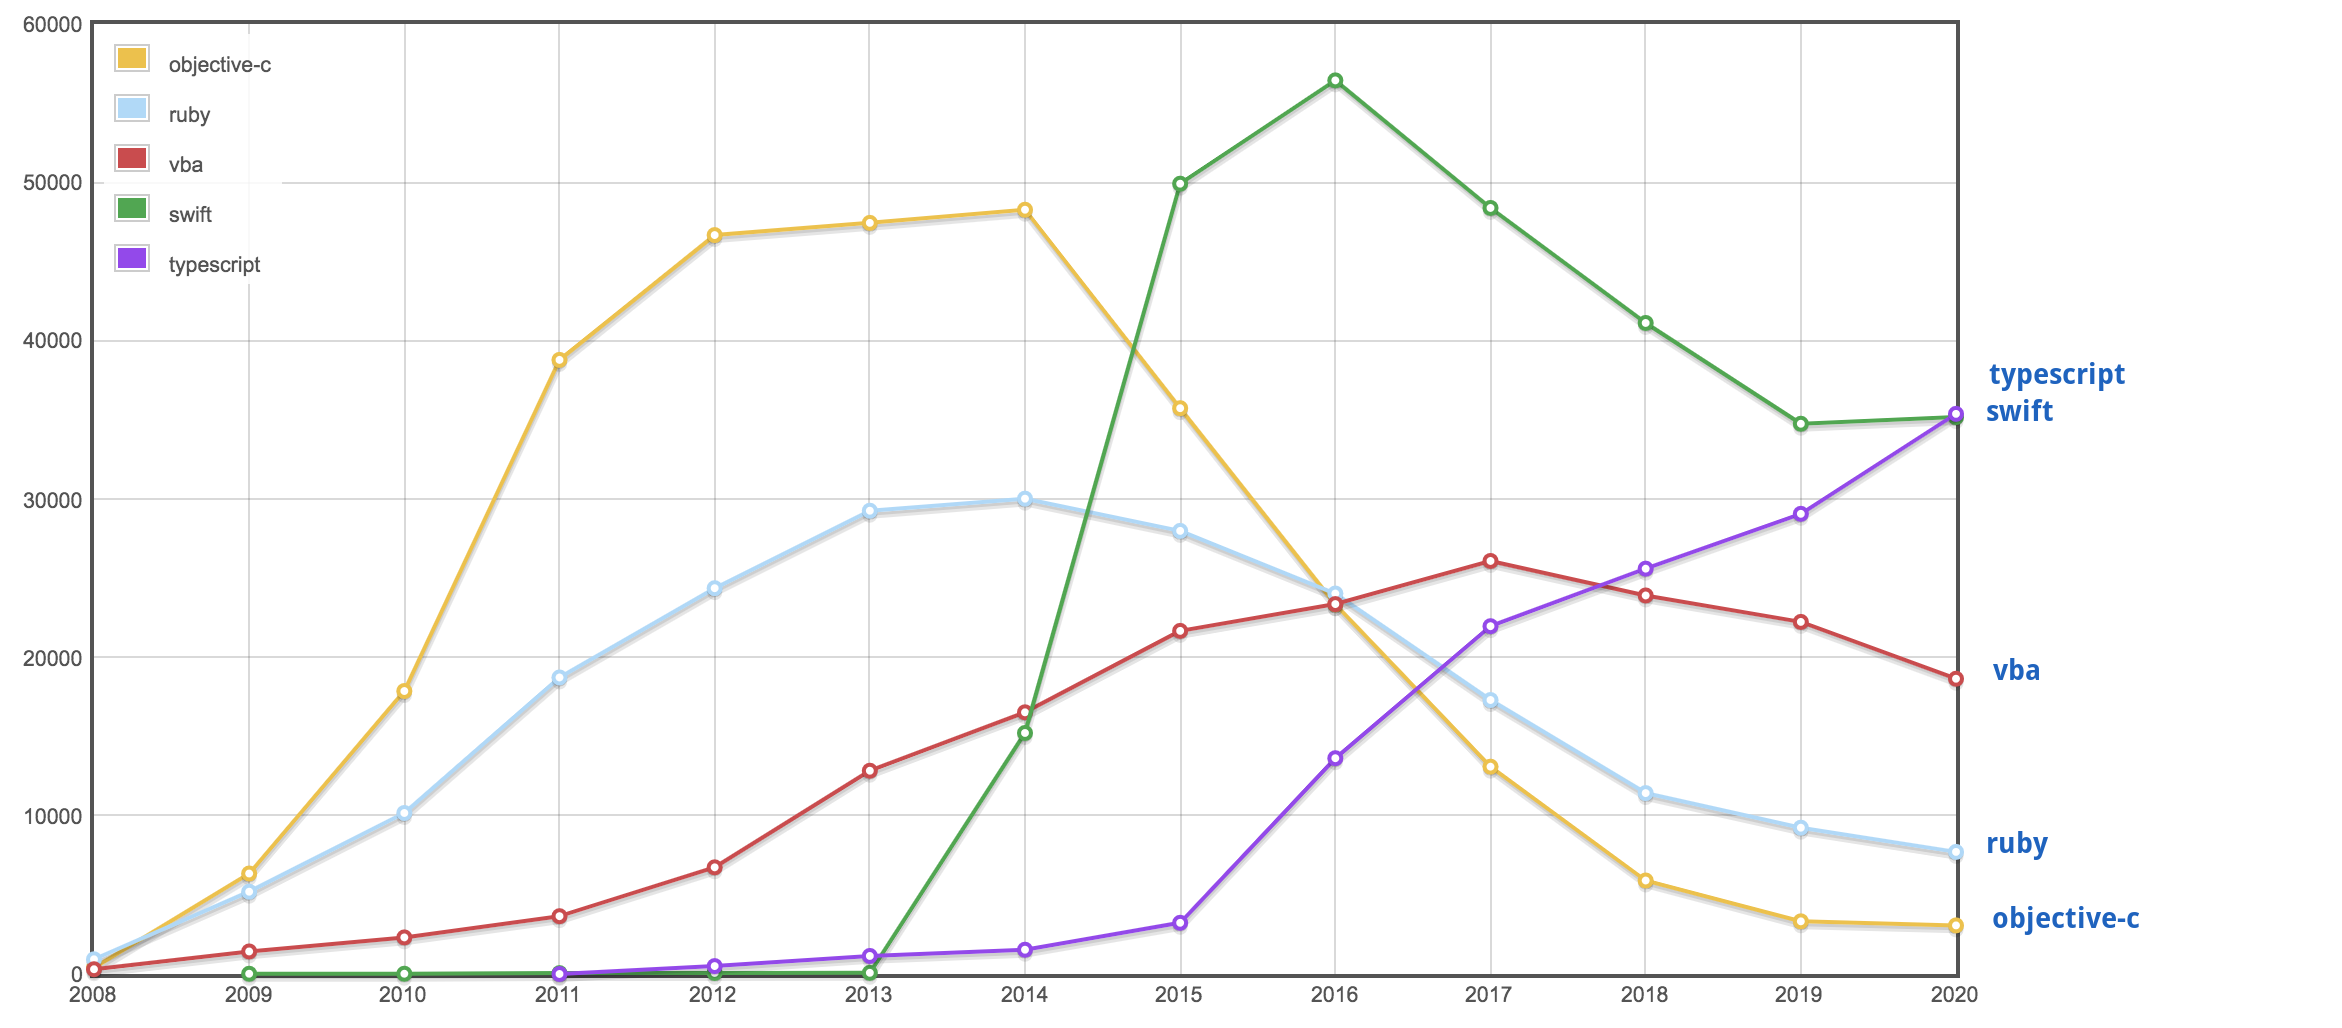 Number of new questions per tag over the years